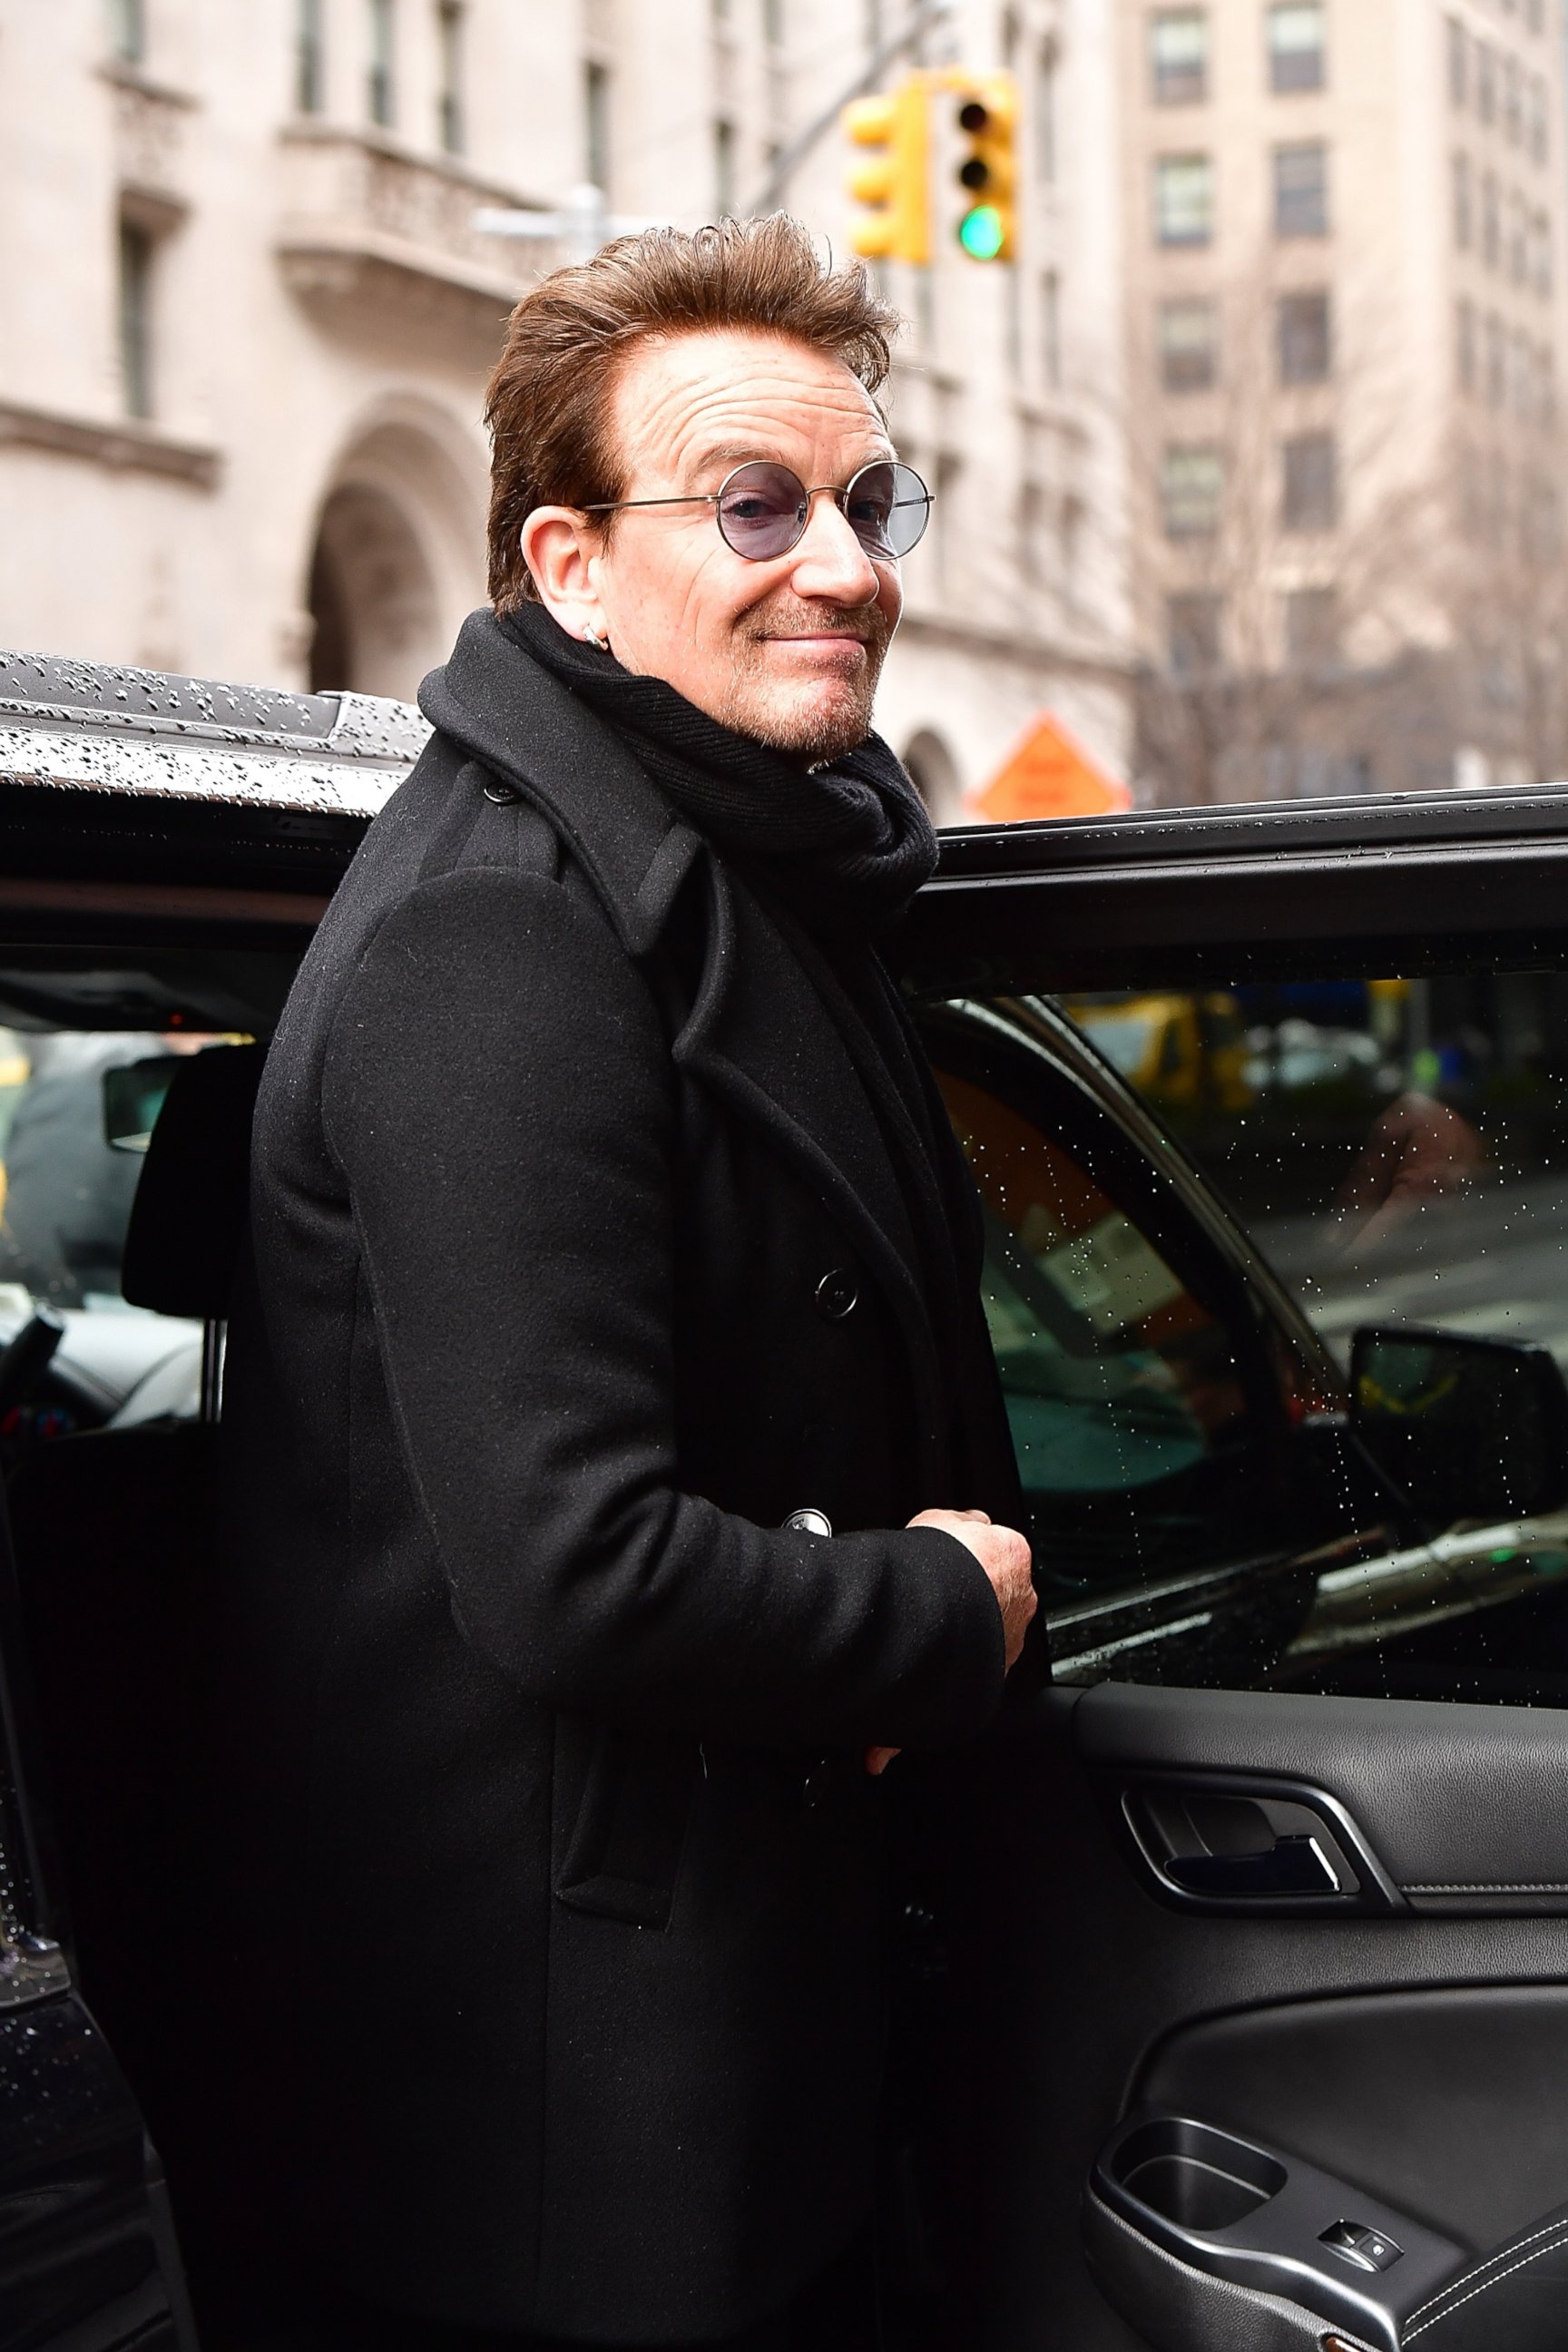 PHOTO: Bono leaves Upland restaurant on March 10, 2017 in New York City.  